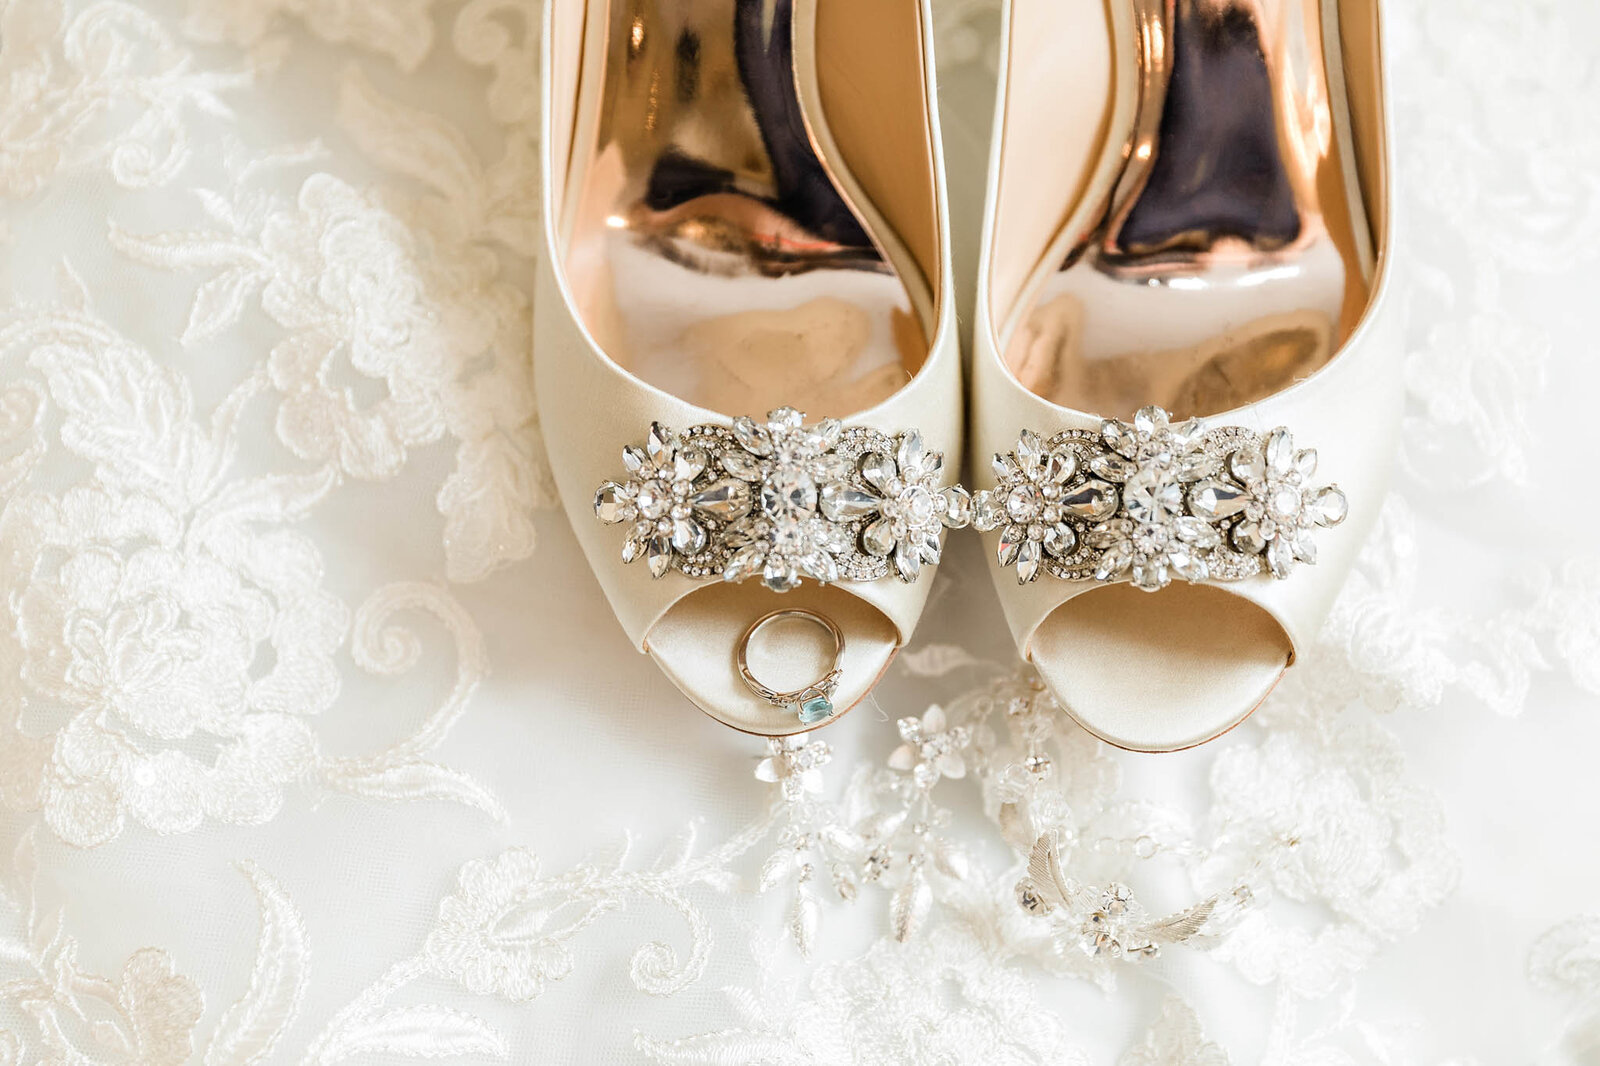 Brides shoes on wedding day